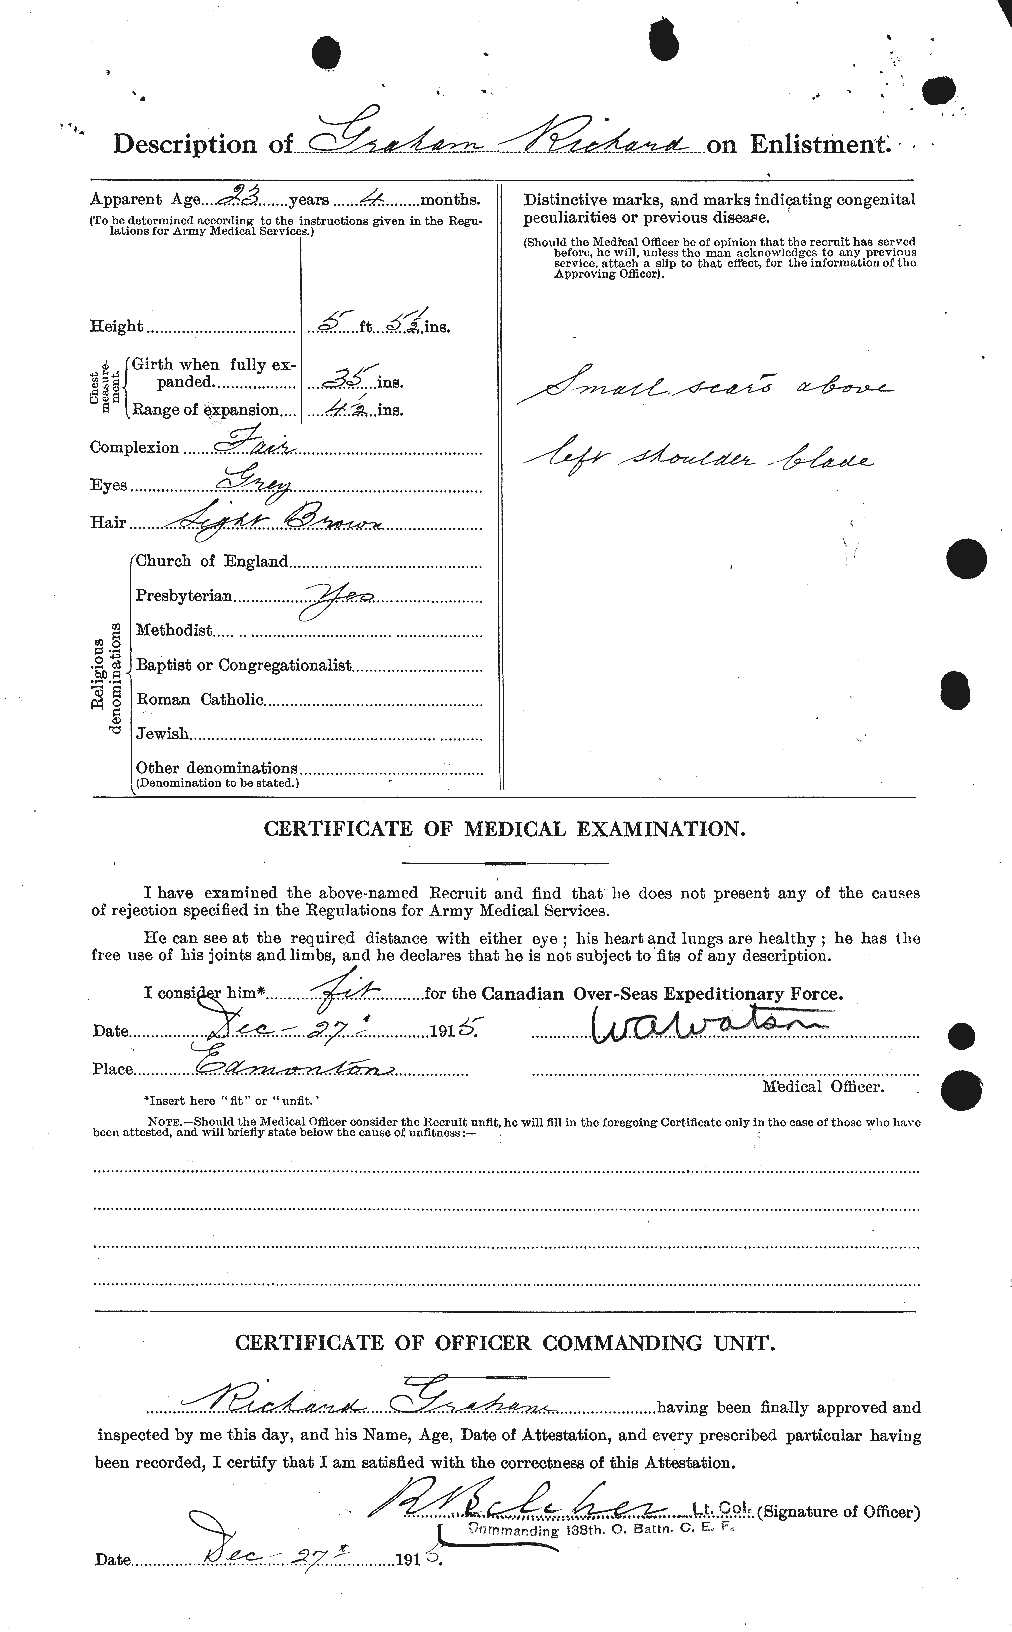 Personnel Records of the First World War - CEF 359365b